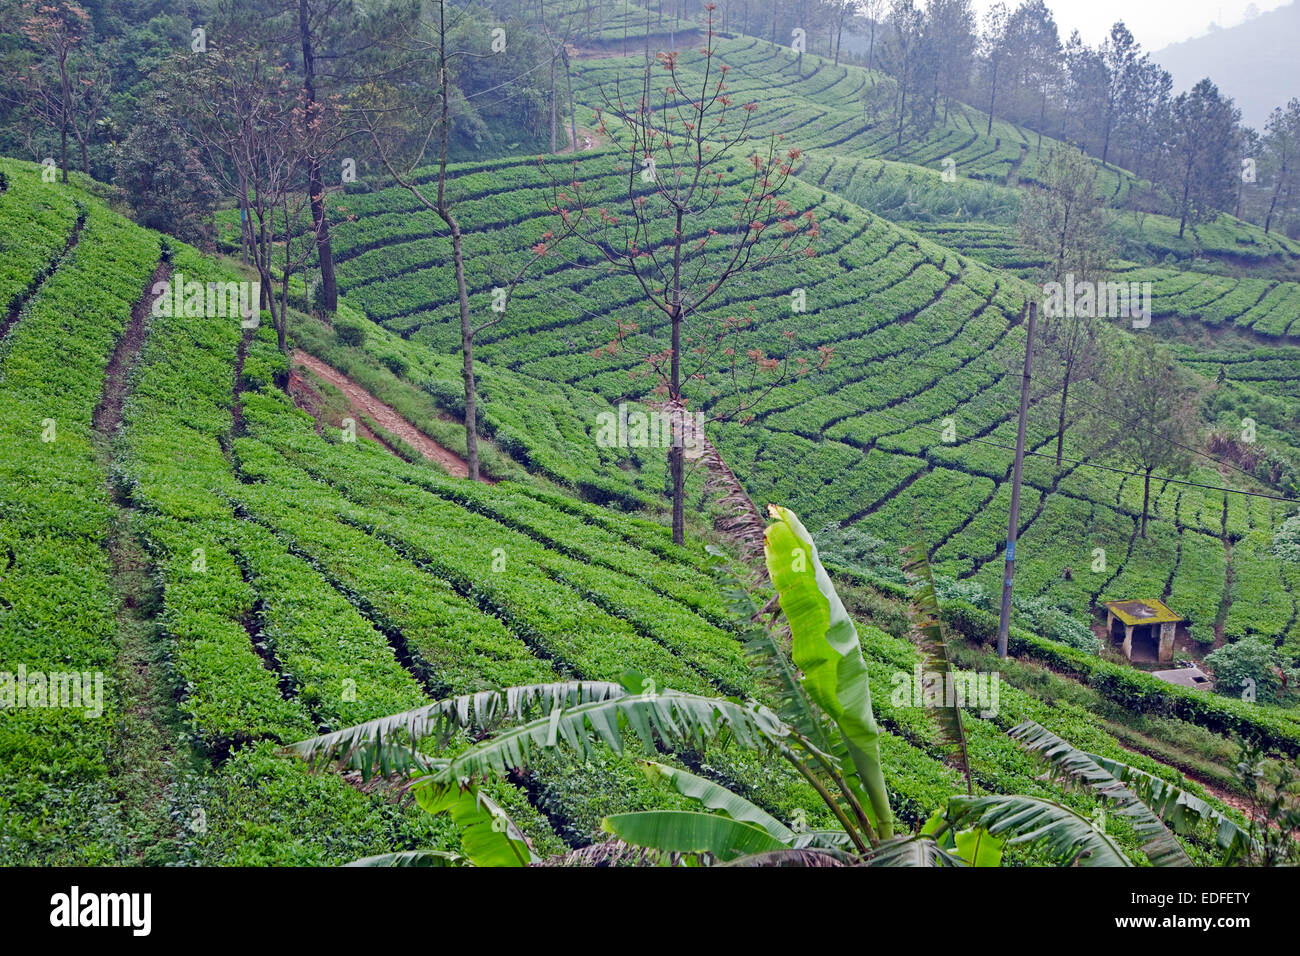 Indonesian terraced tea plantation on the slopes of the Mount Gede / Gunung Gede volcano, West Java, Indonesia Stock Photo